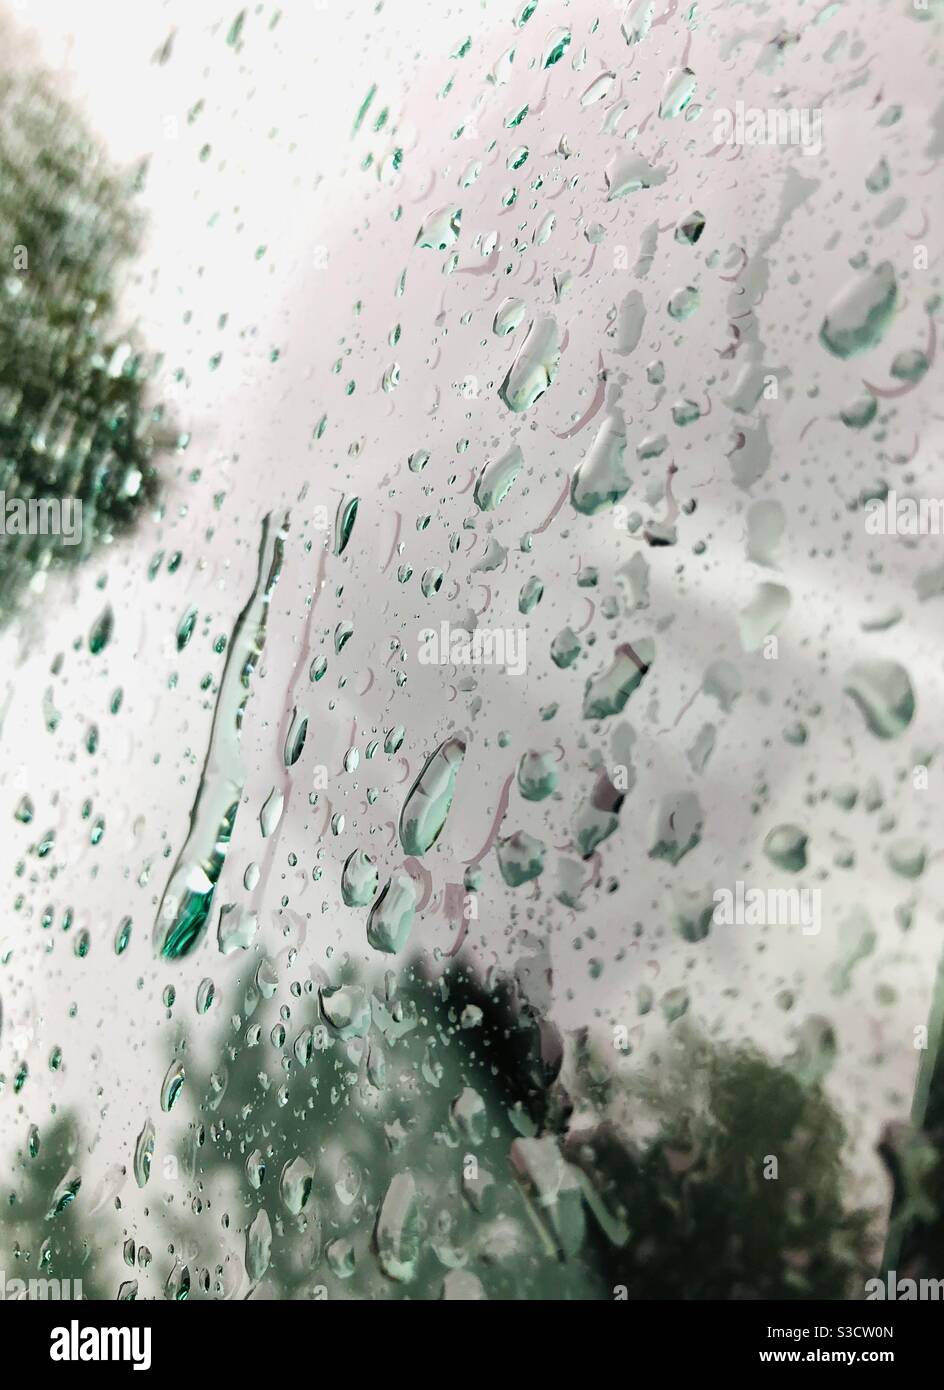 Outside shot of raindrops on car windshield reflecting green trees Stock Photo